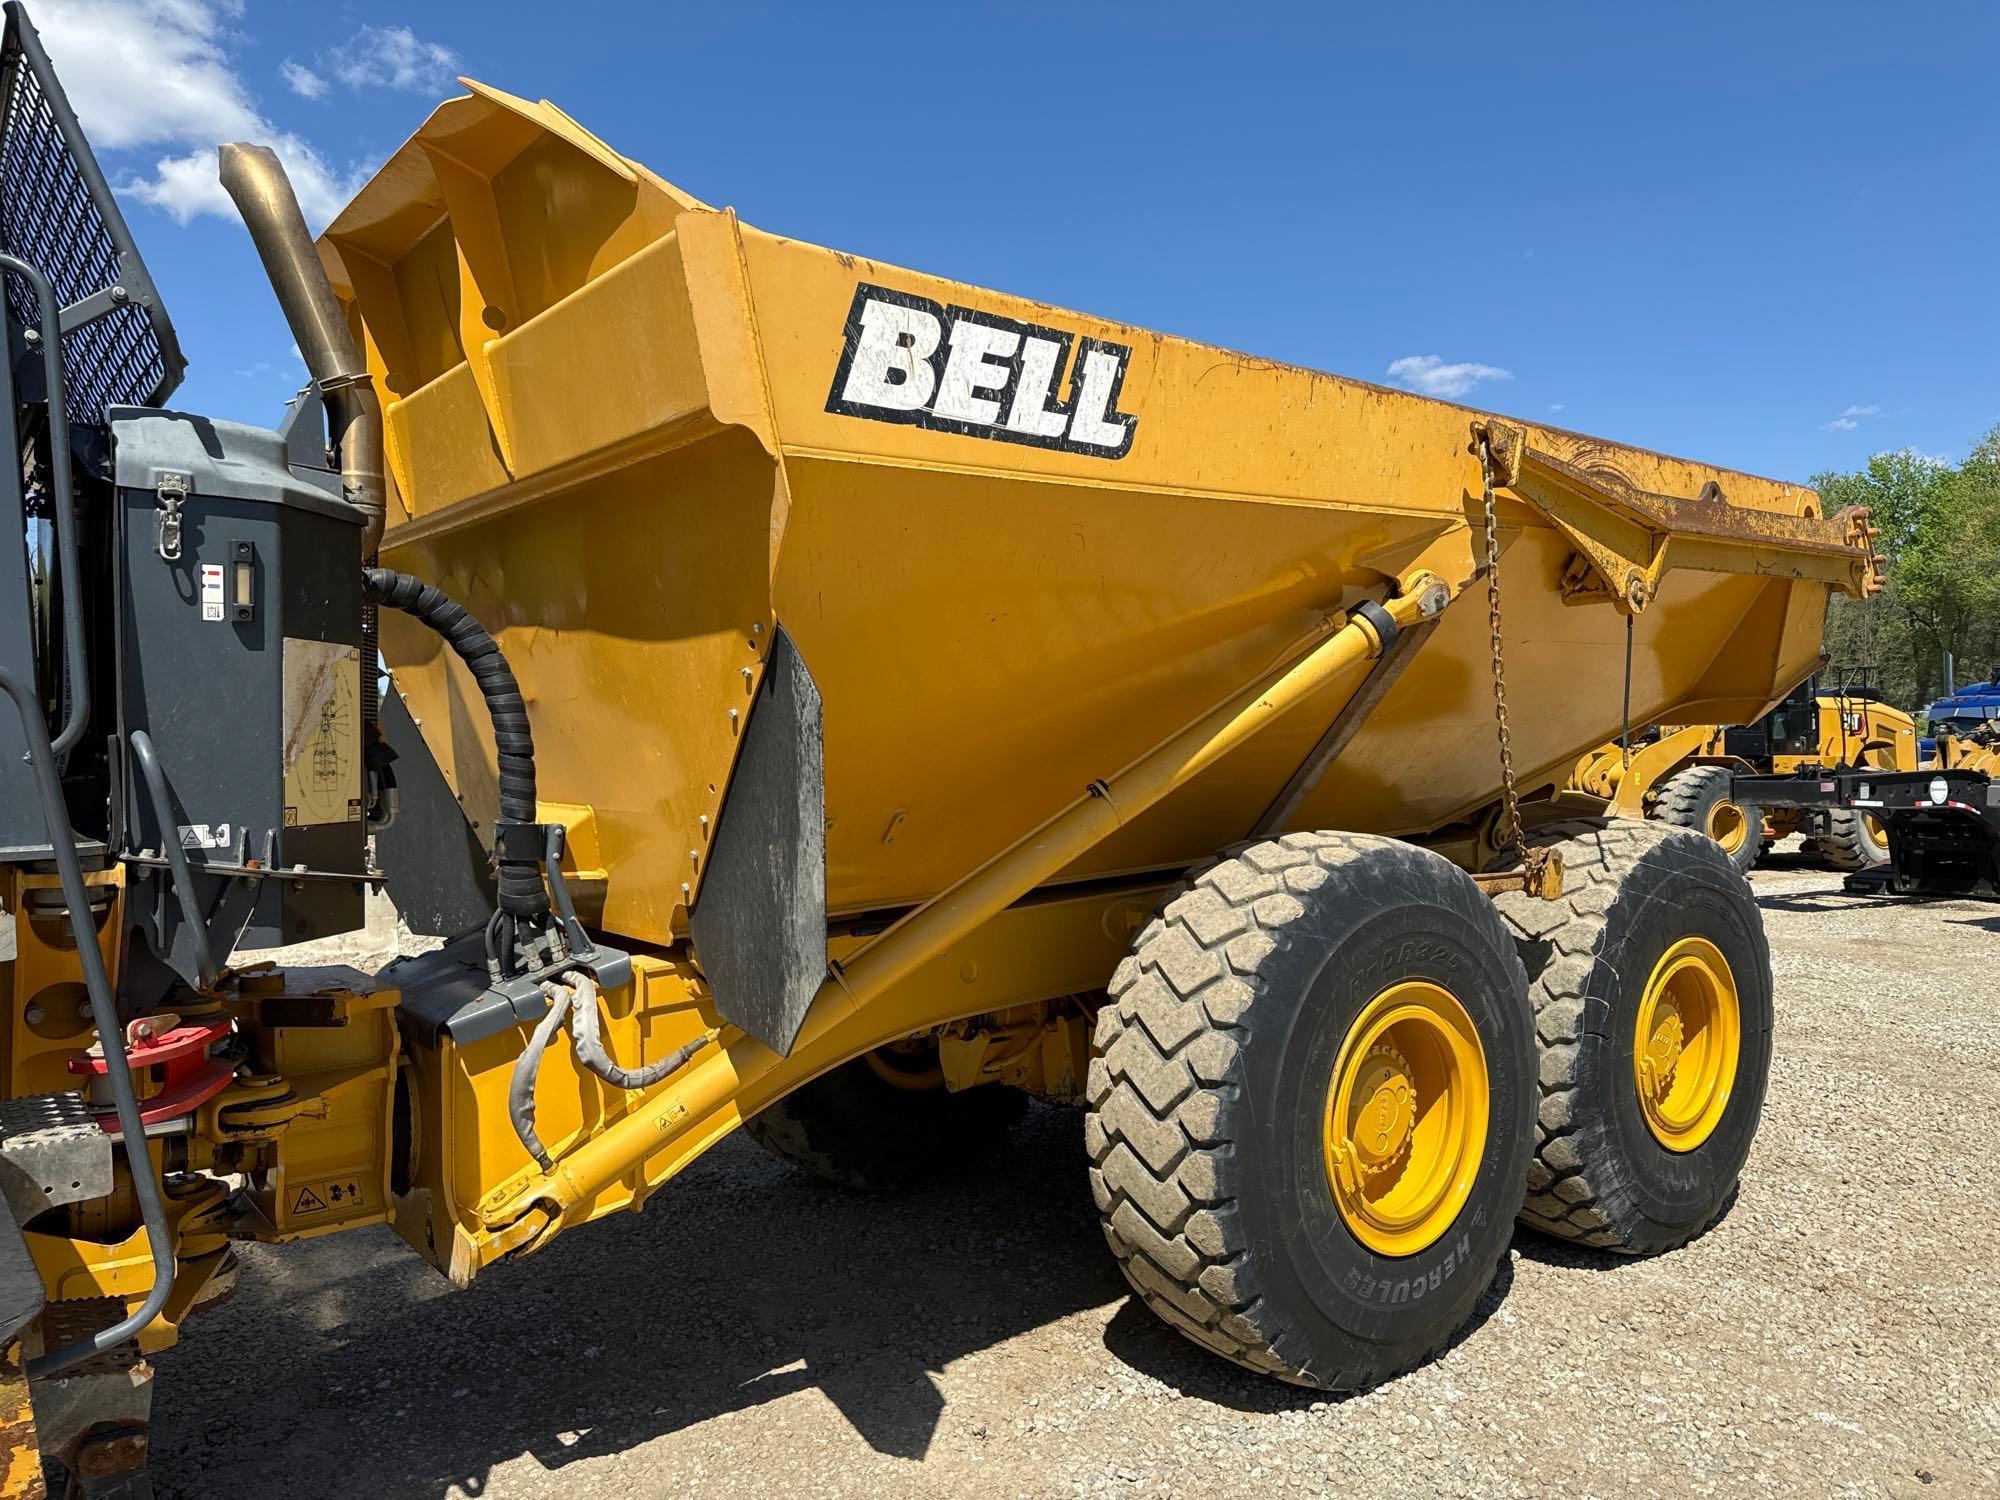 2017 BELL B30E ARTICULATED HAUL TRUCK SN:2007681 6x6, powered by diesel engine, equipped with Cab,